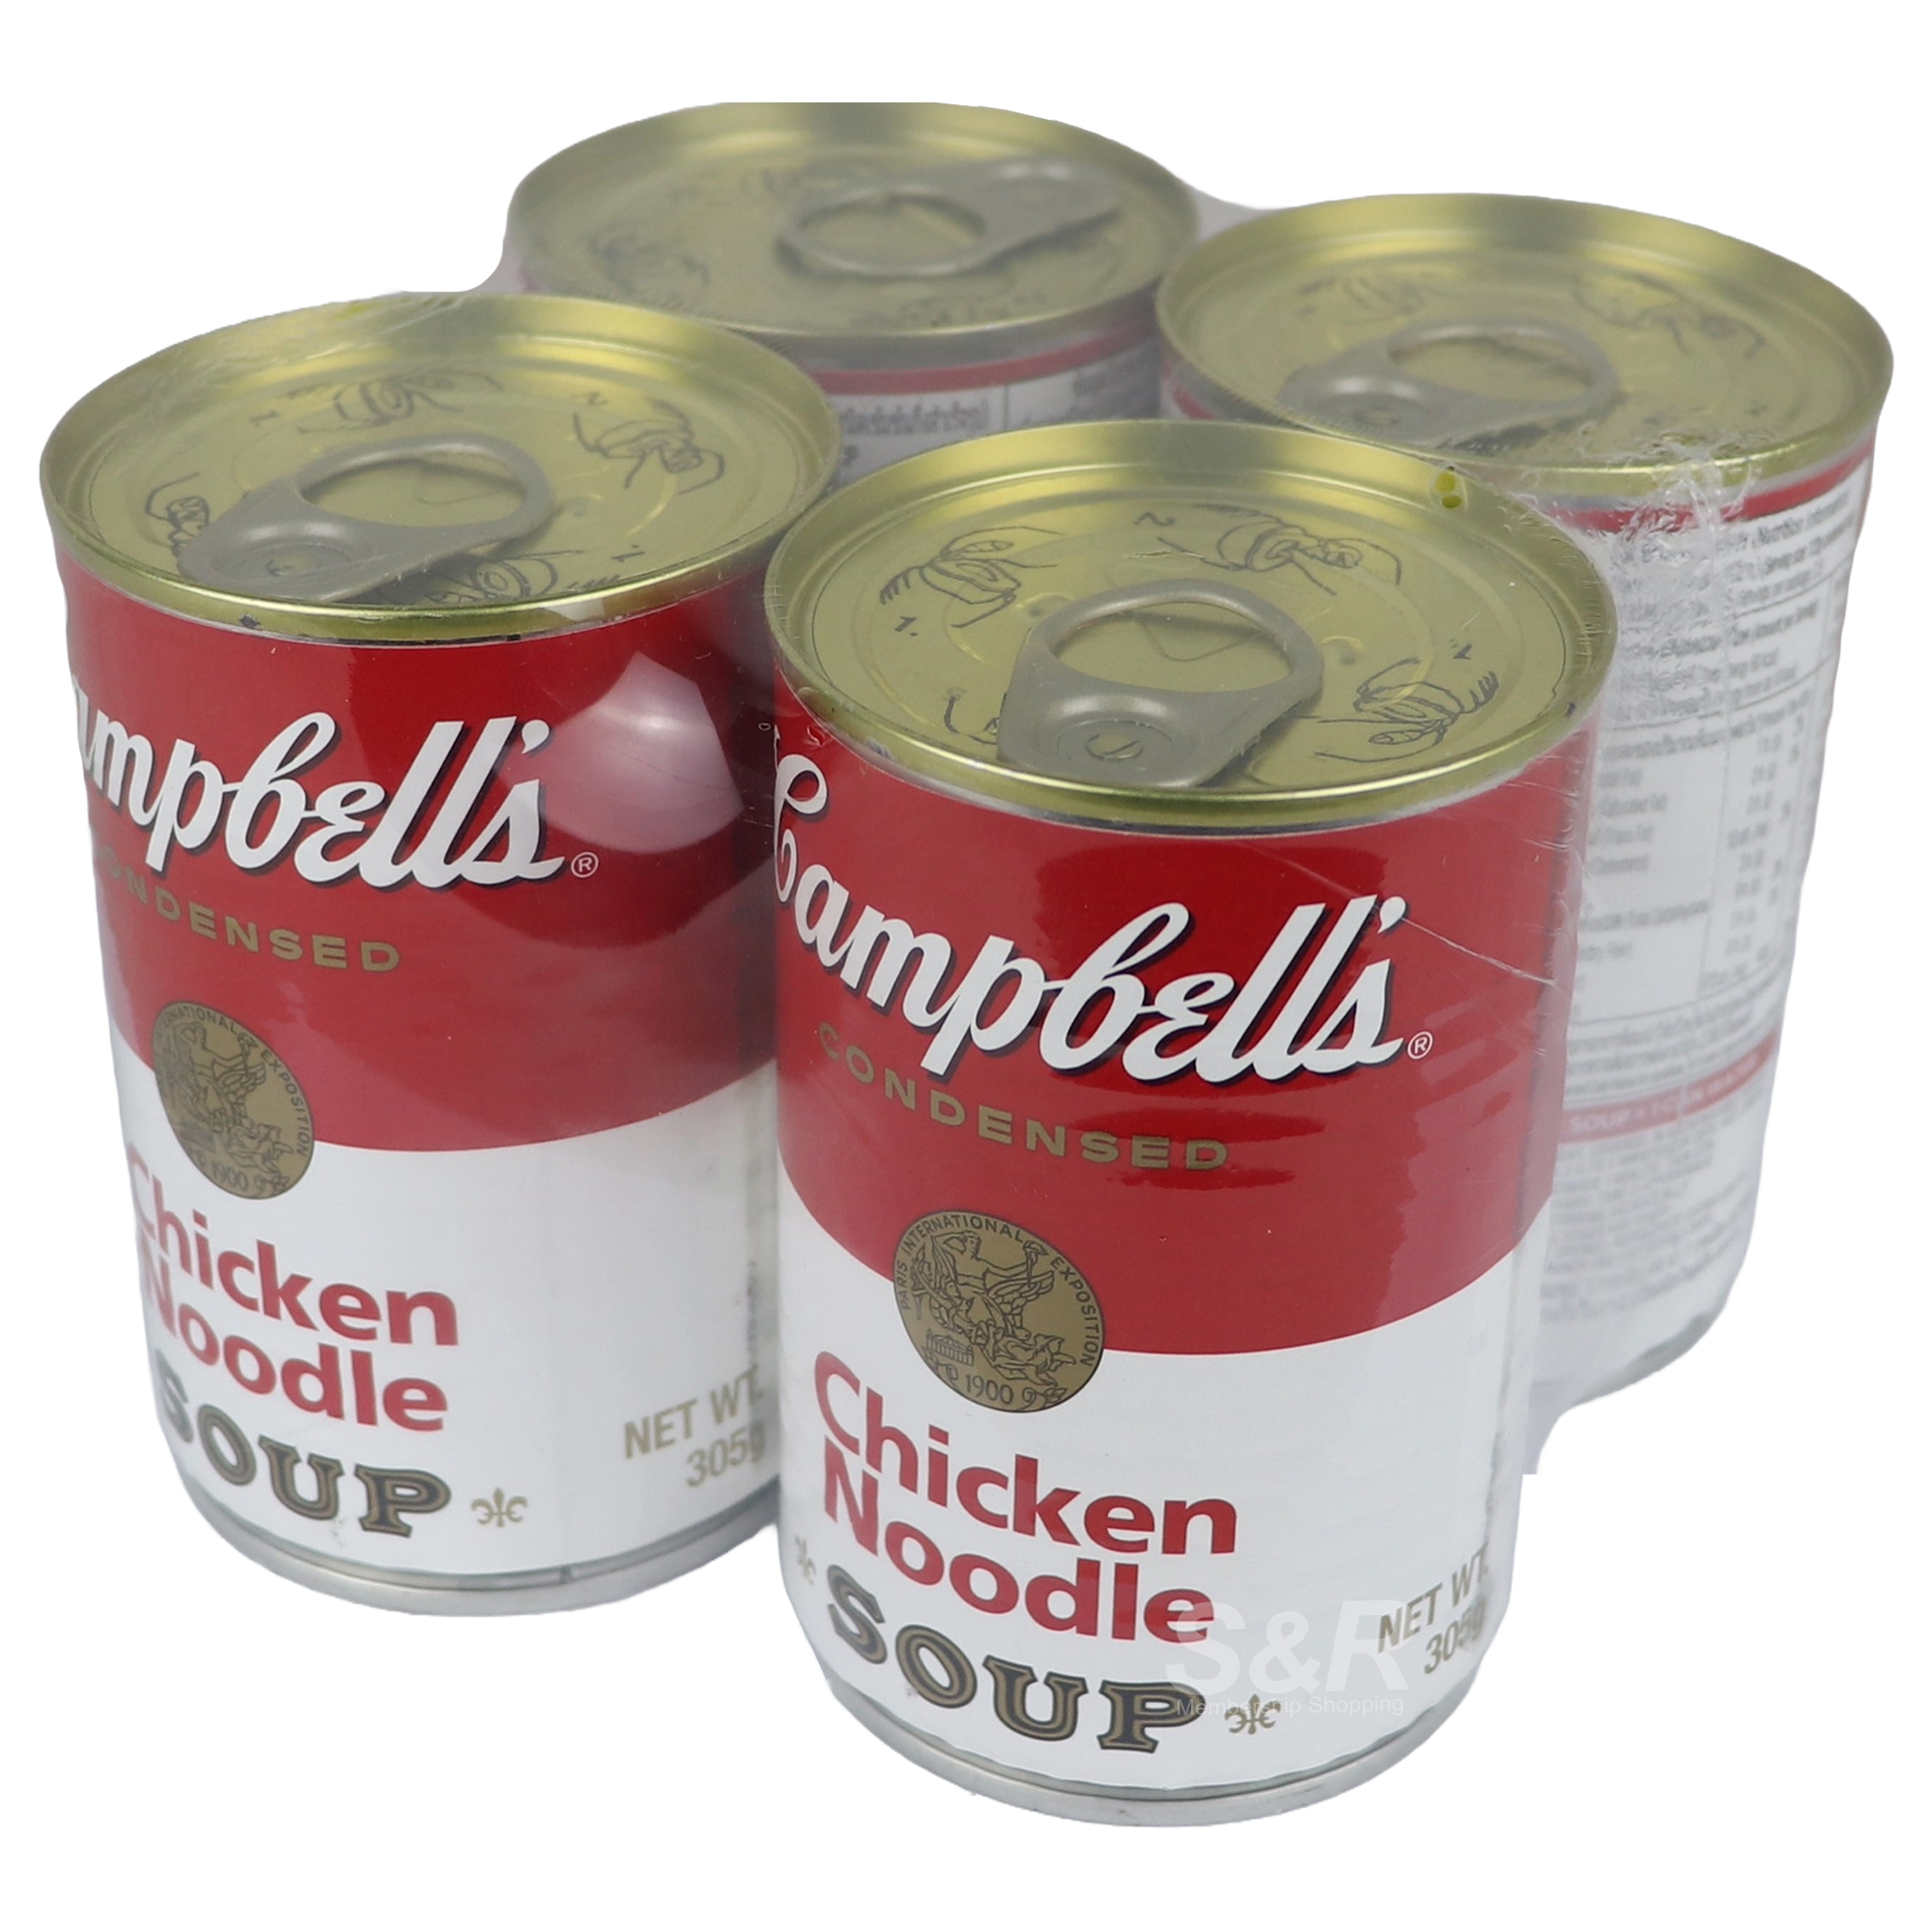 Campbell’s Condensed Chicken Noodle Soup 4 cans